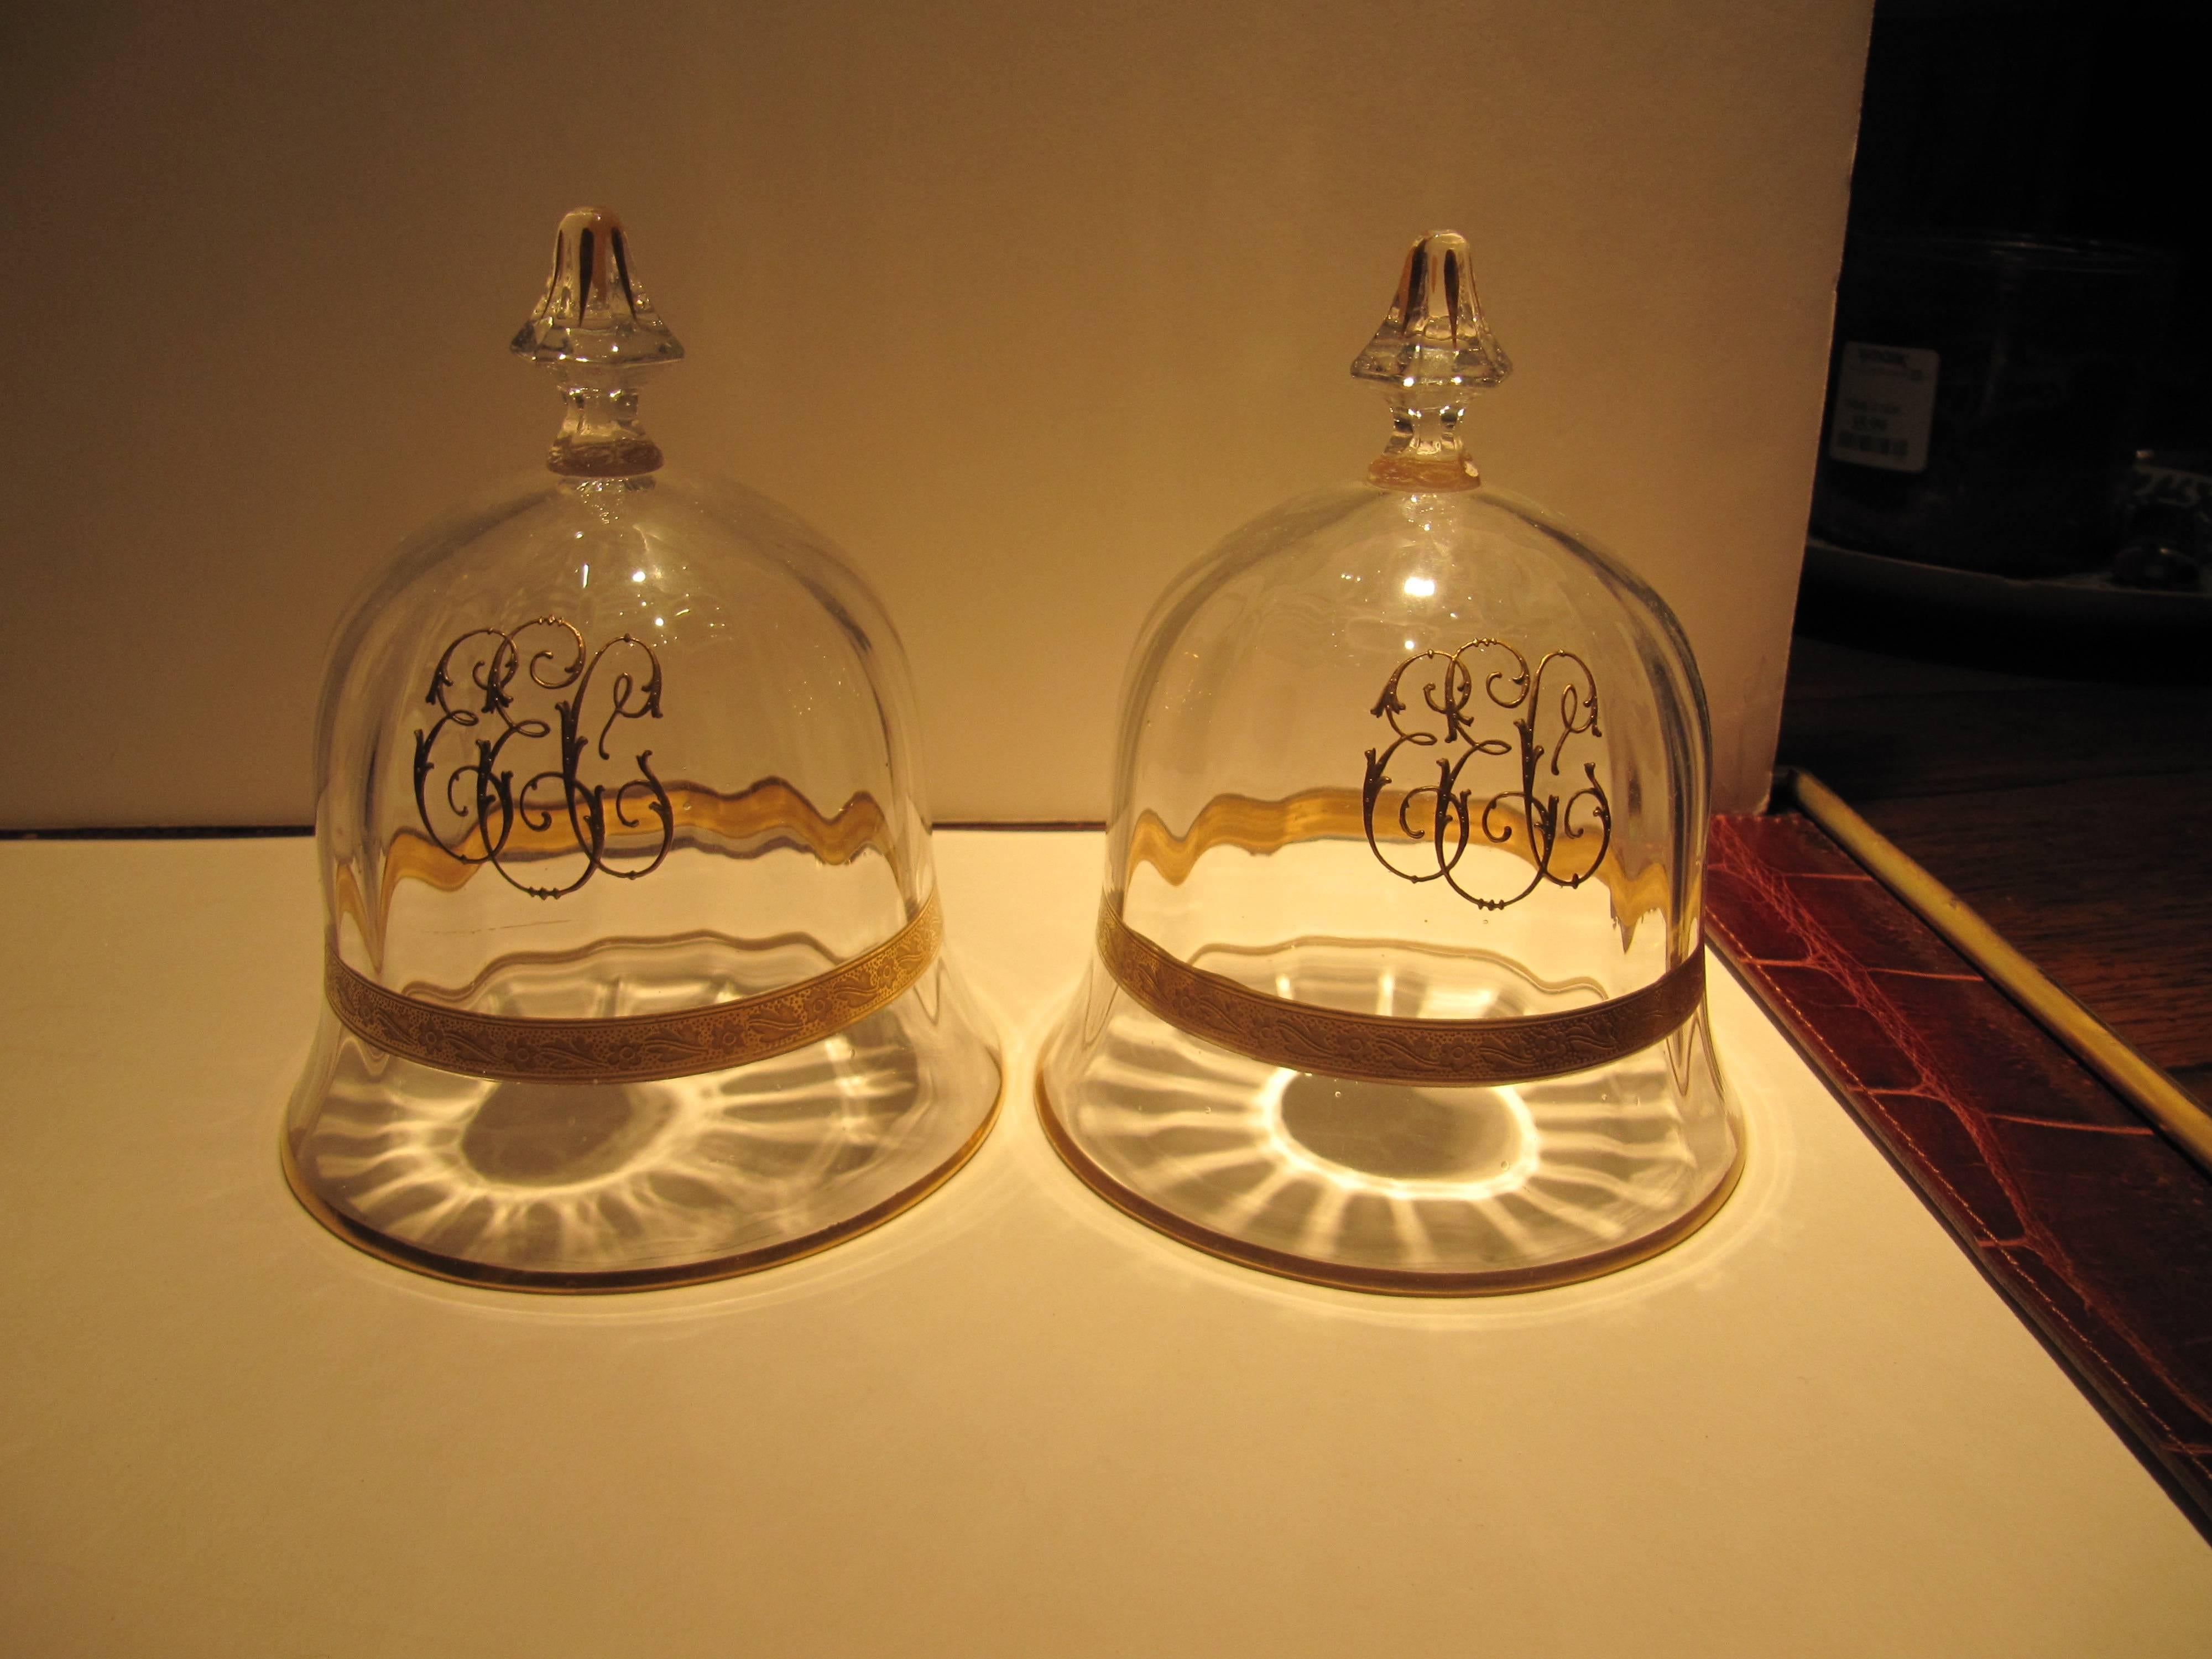 Set of eight charming crystal cloche with gilt accents. Great tabletop presentation for small dessert. Perfect cover for a wheel of Boursin cheese.